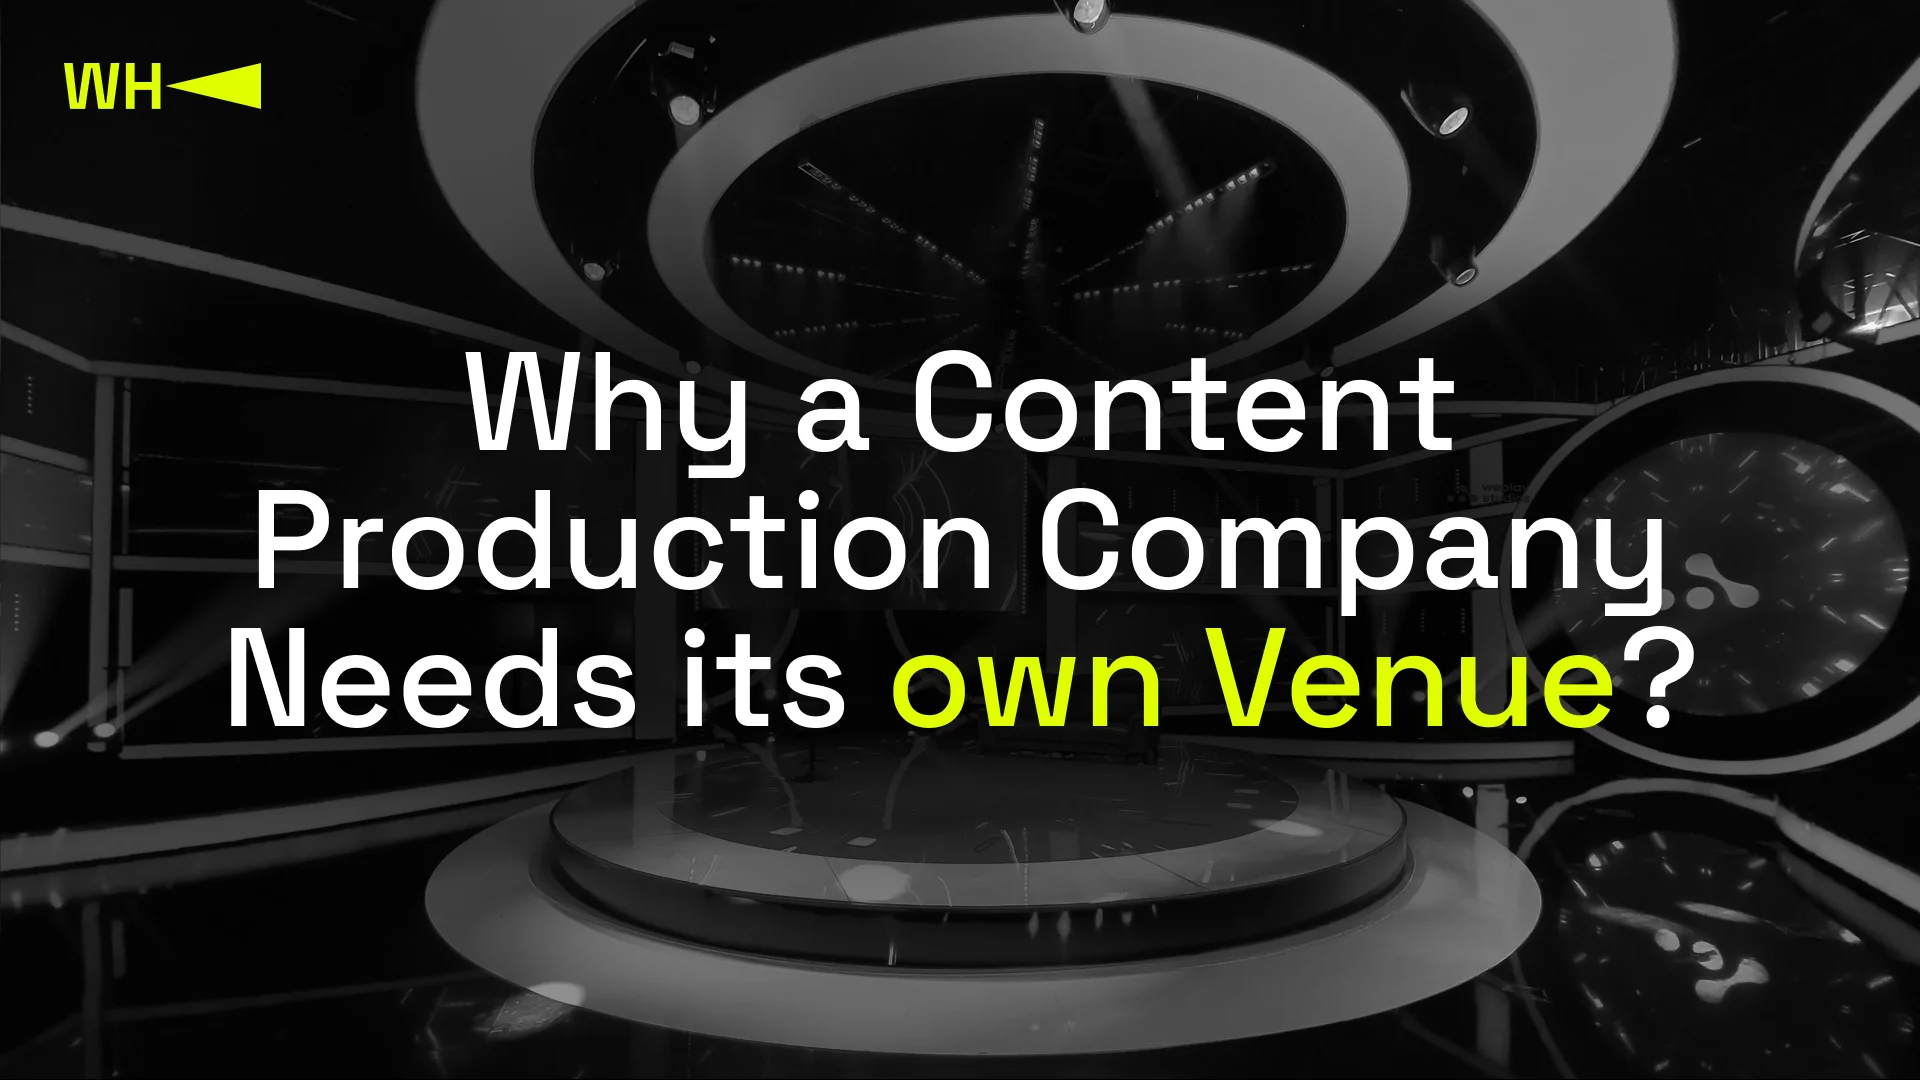 Why a Content Production Company Needs its own Venue?